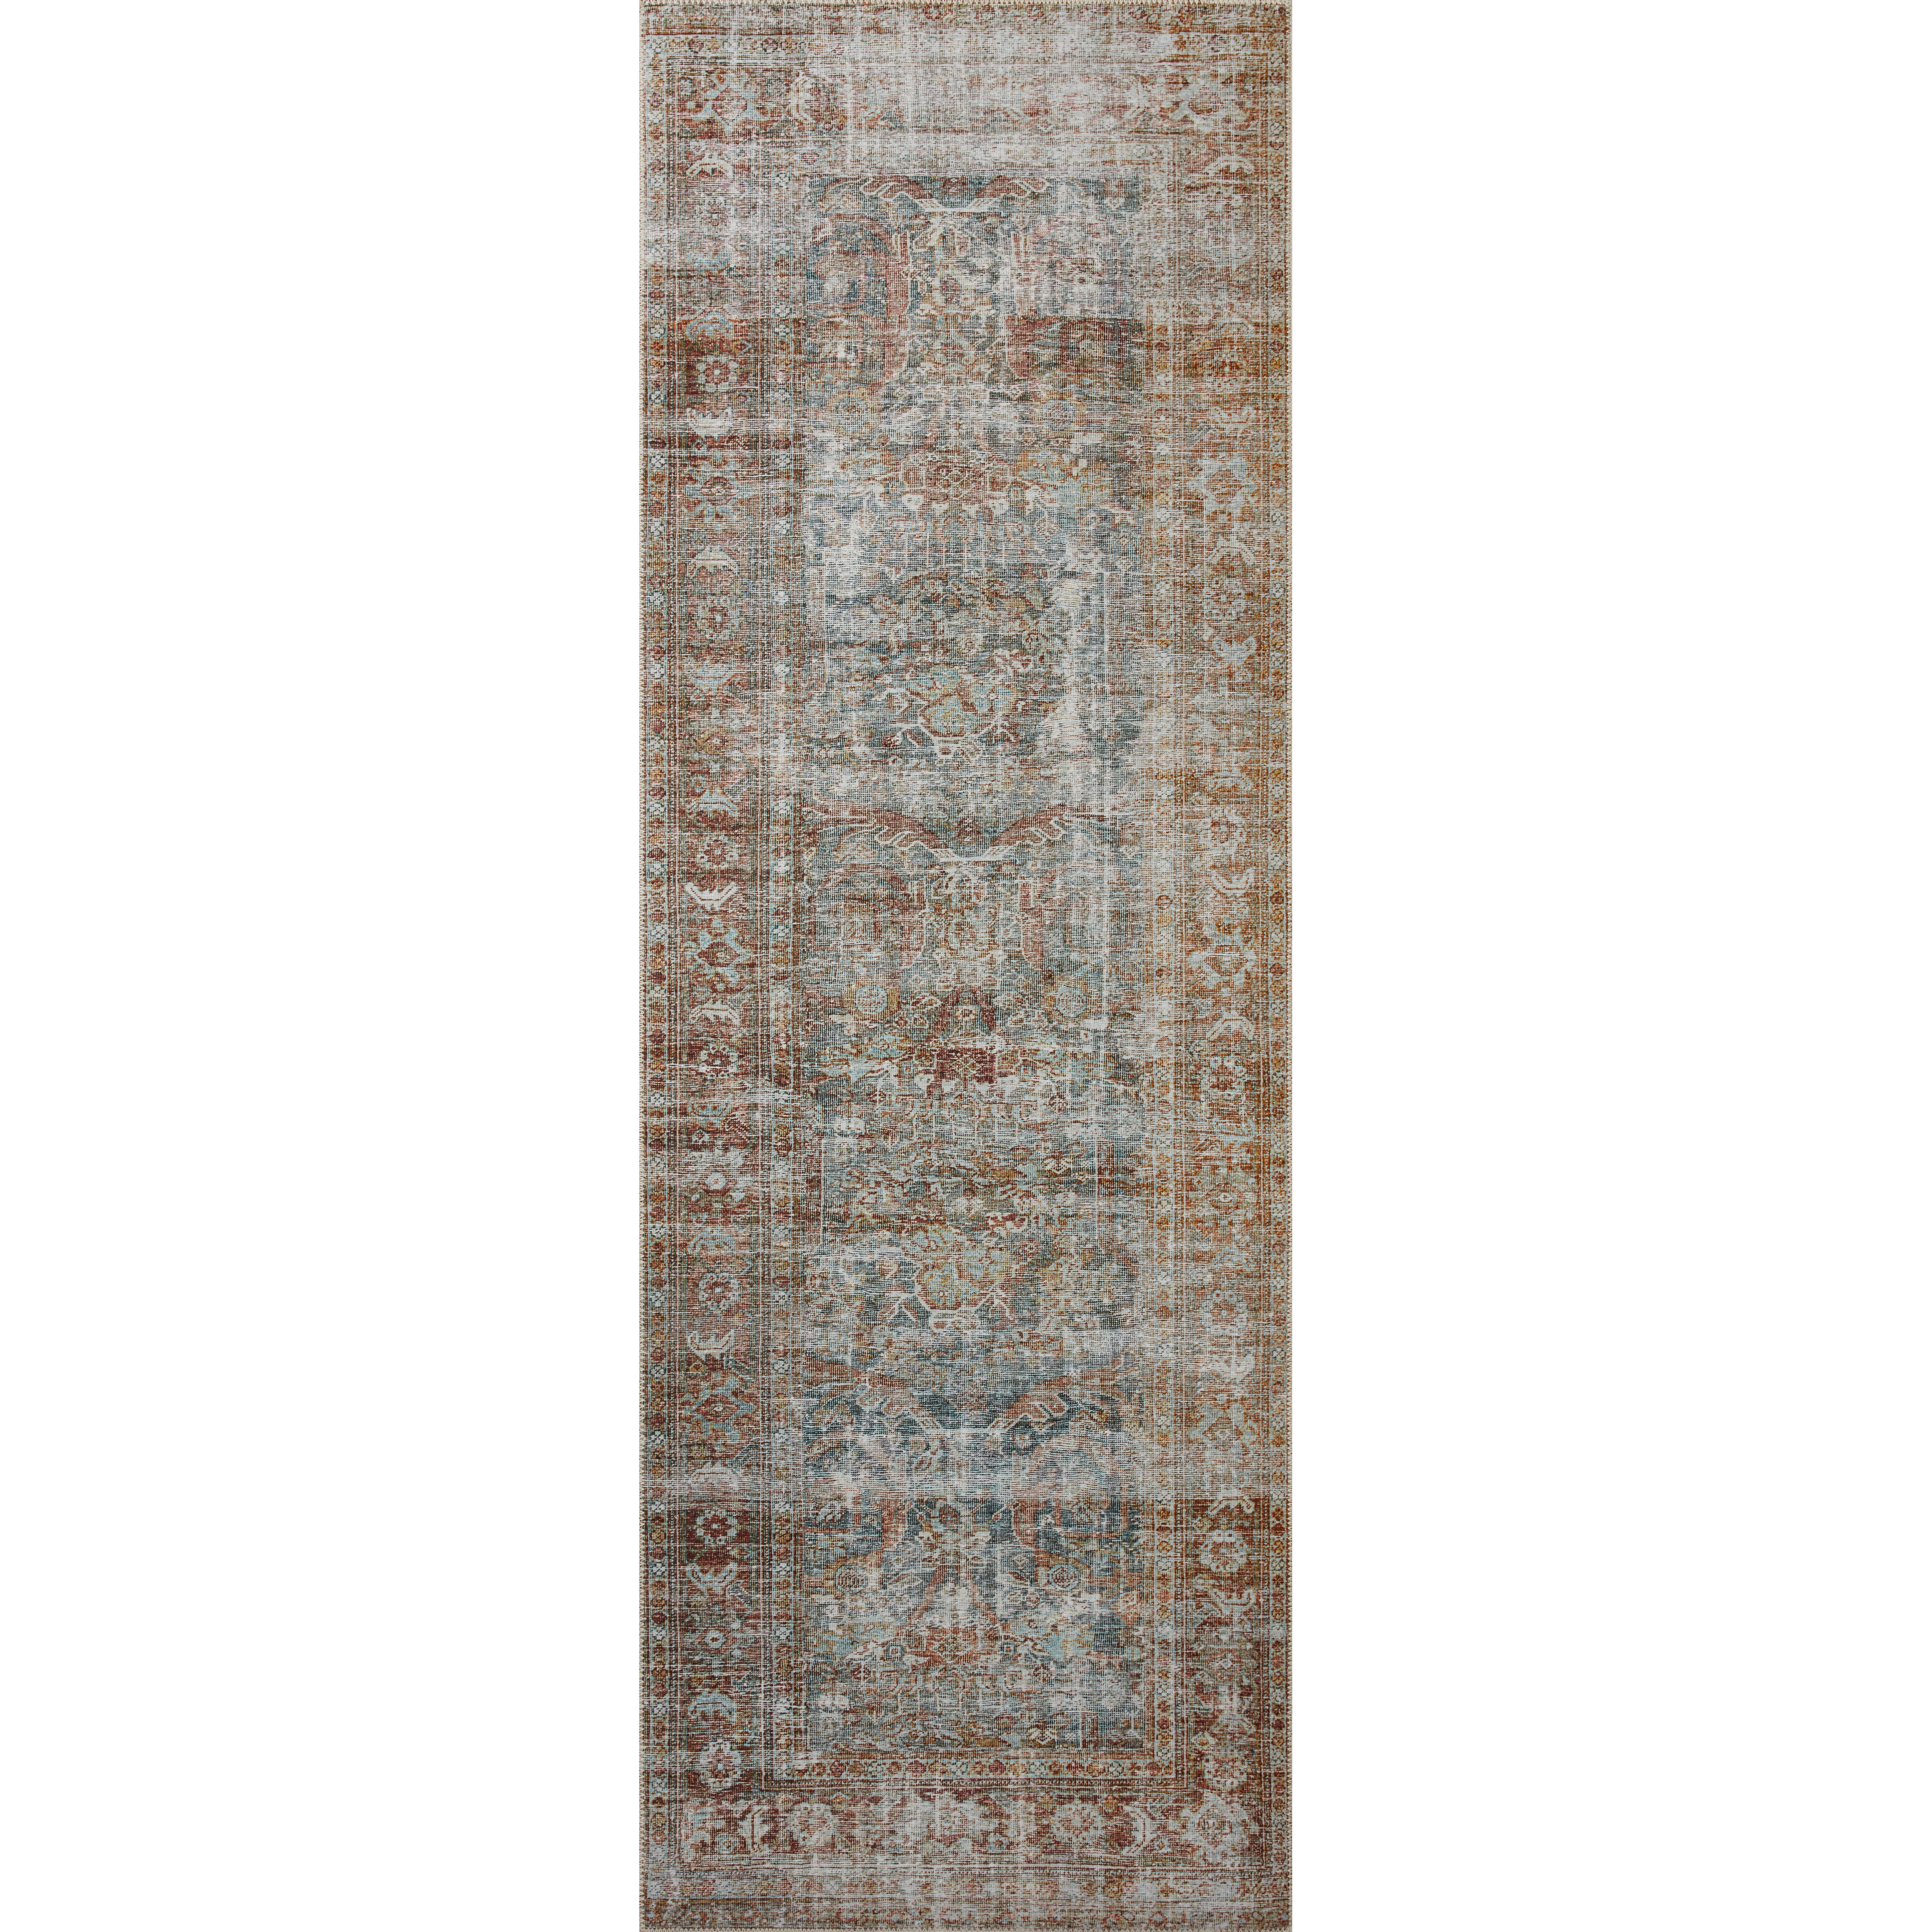 Durable, low pile, and soft underfoot, this rug is inspired by classic vintage and antique rugs. The Jules Chris Loves Julia Lagoon / Brick rug from Loloi features a beautiful vintage pattern and patina. The rug is easy to clean and maintain and perfect for living rooms, dining rooms, hallways, and kitchens!